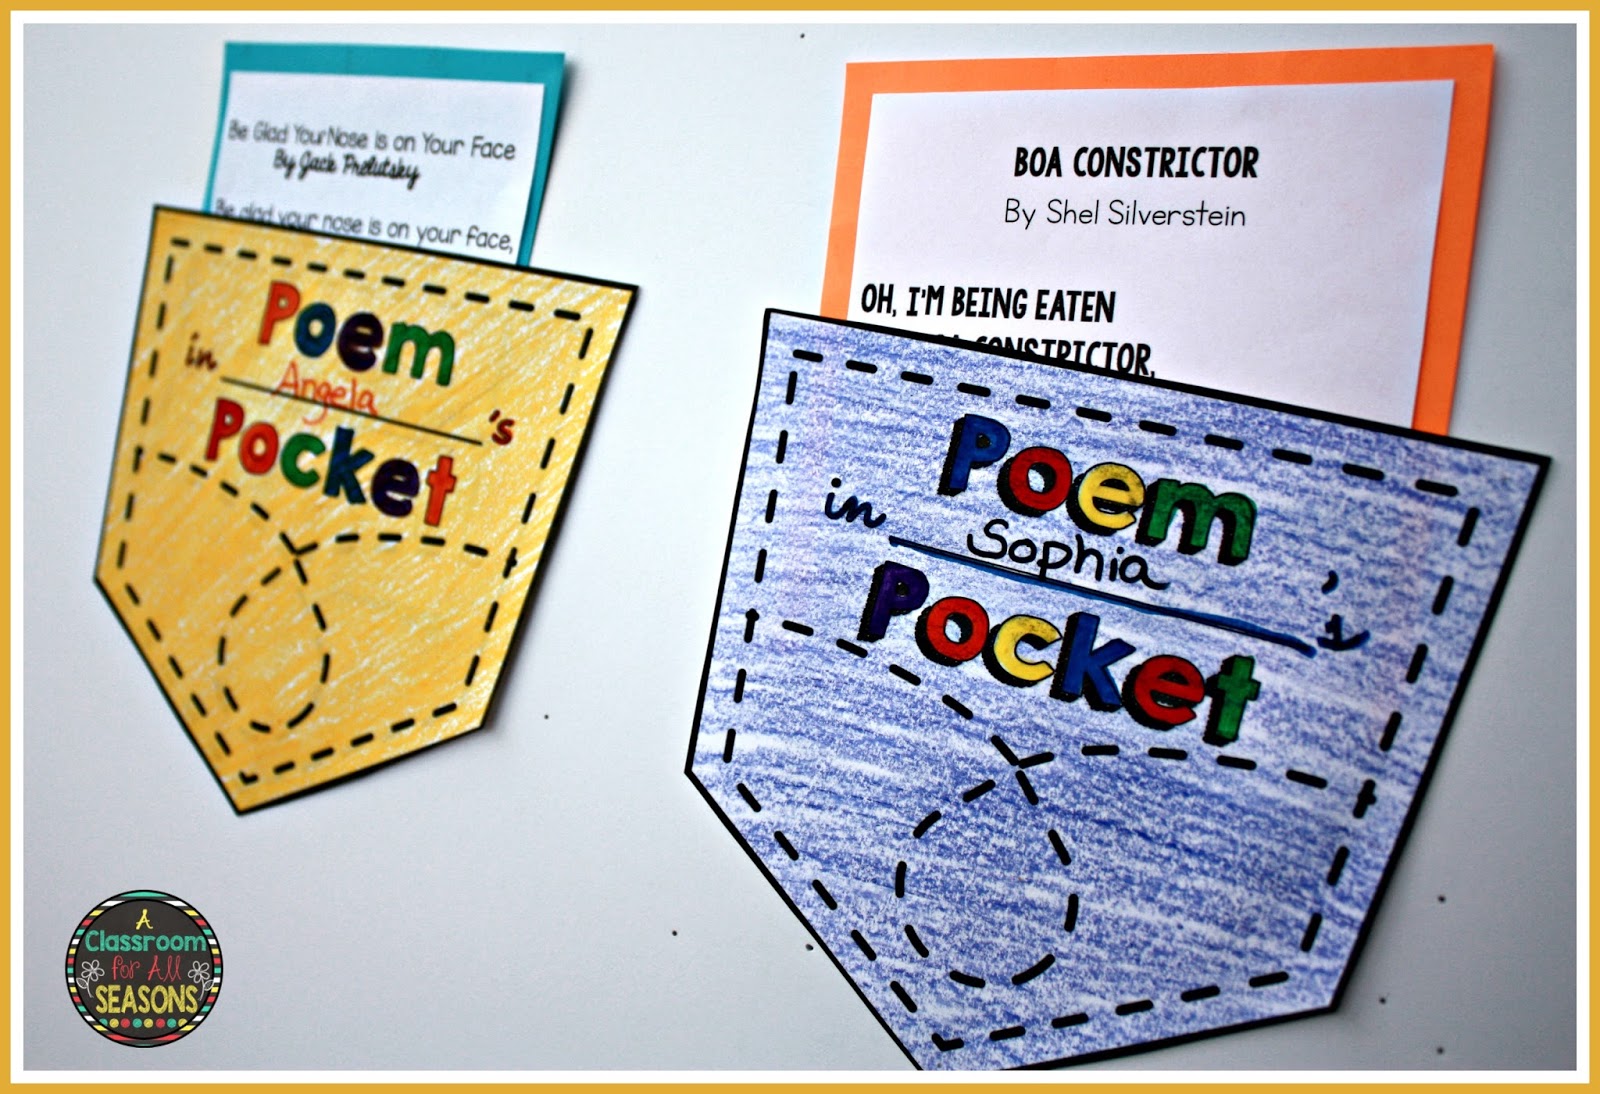 poem-in-your-pocket-a-classroom-for-all-seasons